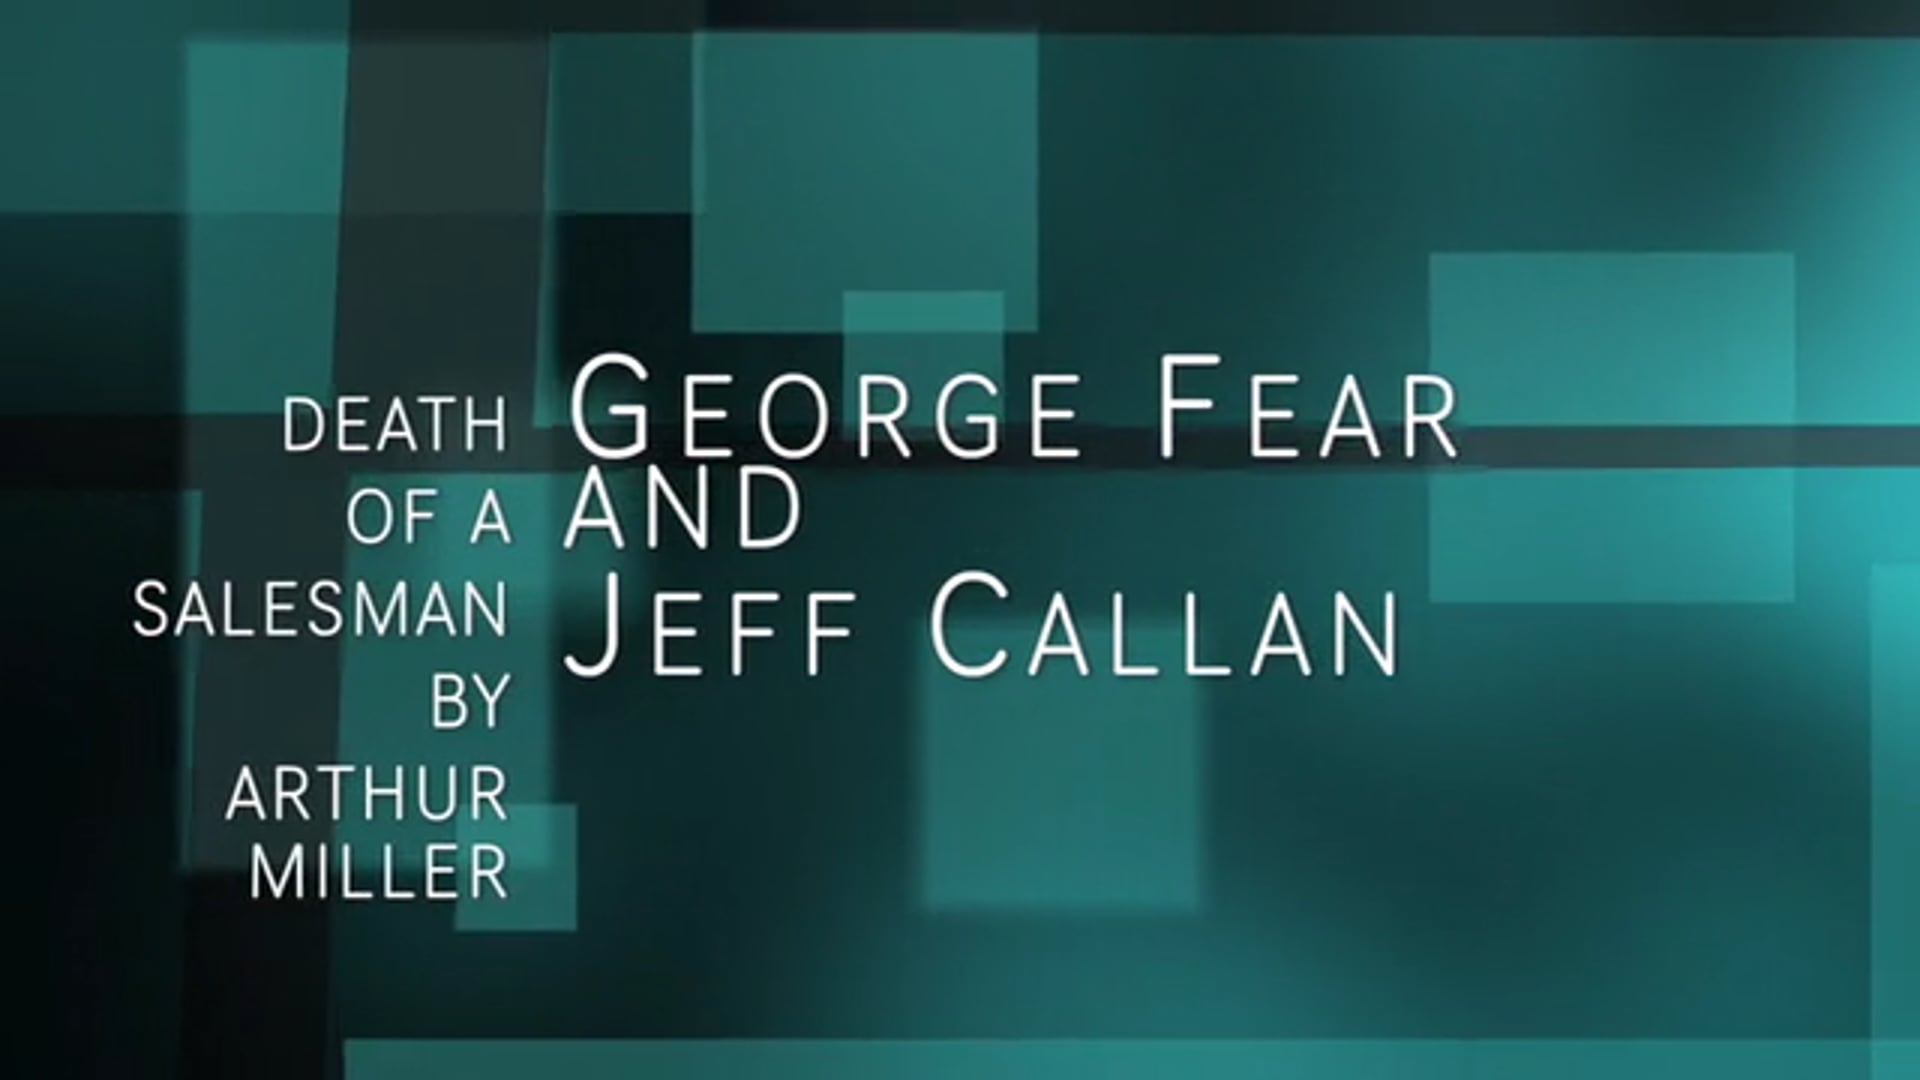 George Fear and Jeff Callan, Death of a Salesman by Arthur Miller